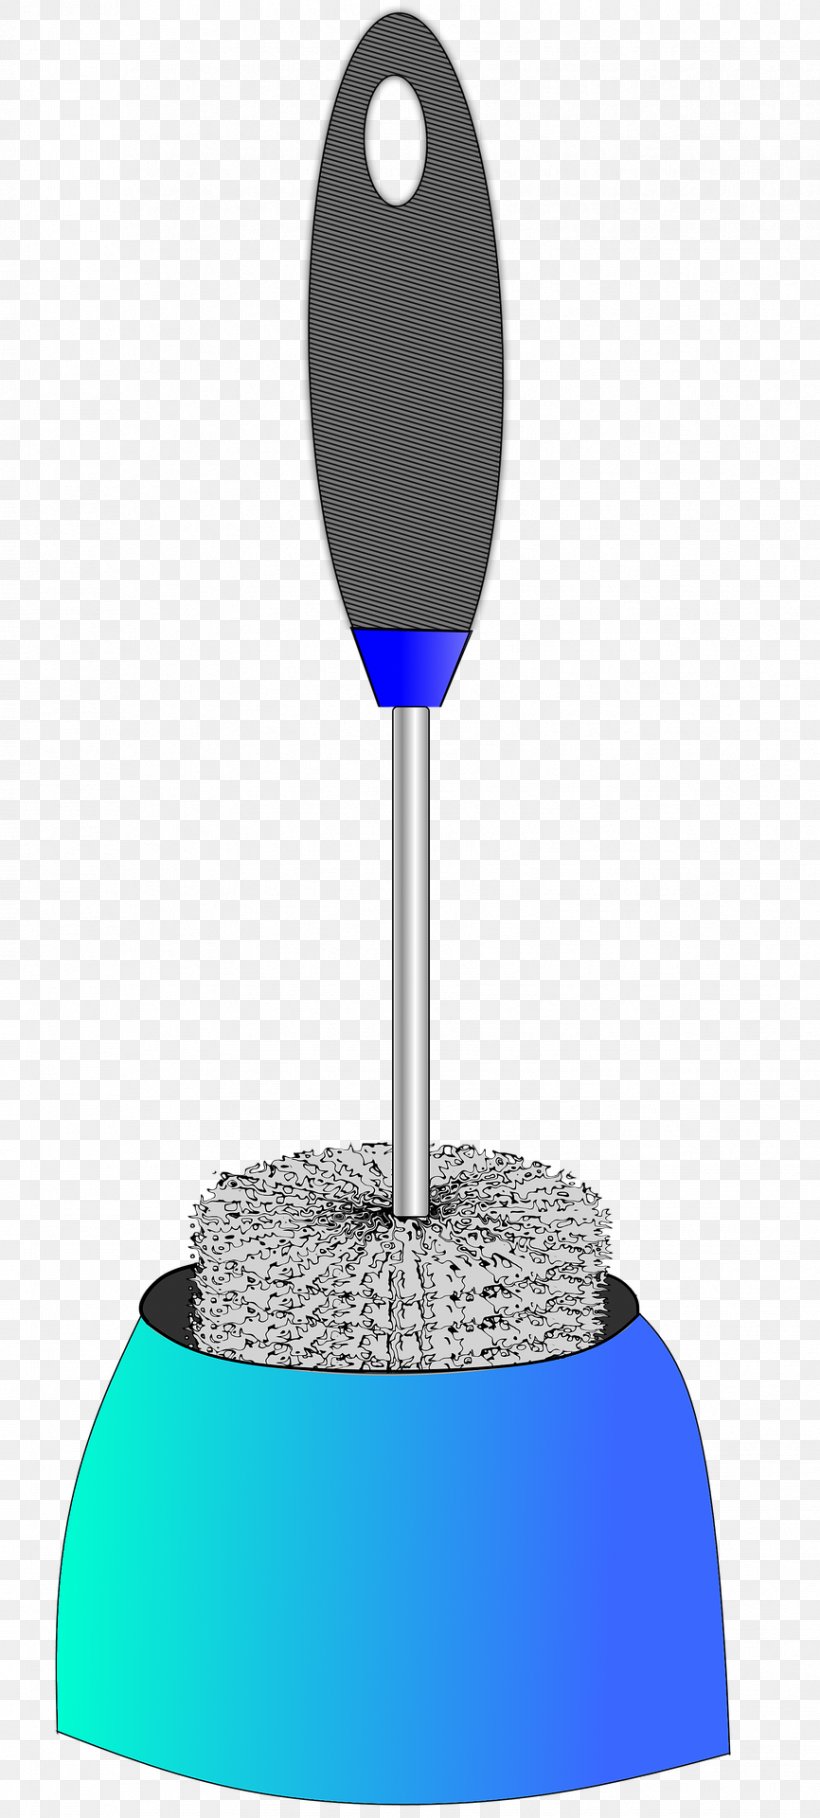 Toilet Brushes & Holders Bathroom Clip Art, PNG, 866x1920px, Toilet Brushes Holders, Bathroom, Brush, Cleaning, Electric Blue Download Free